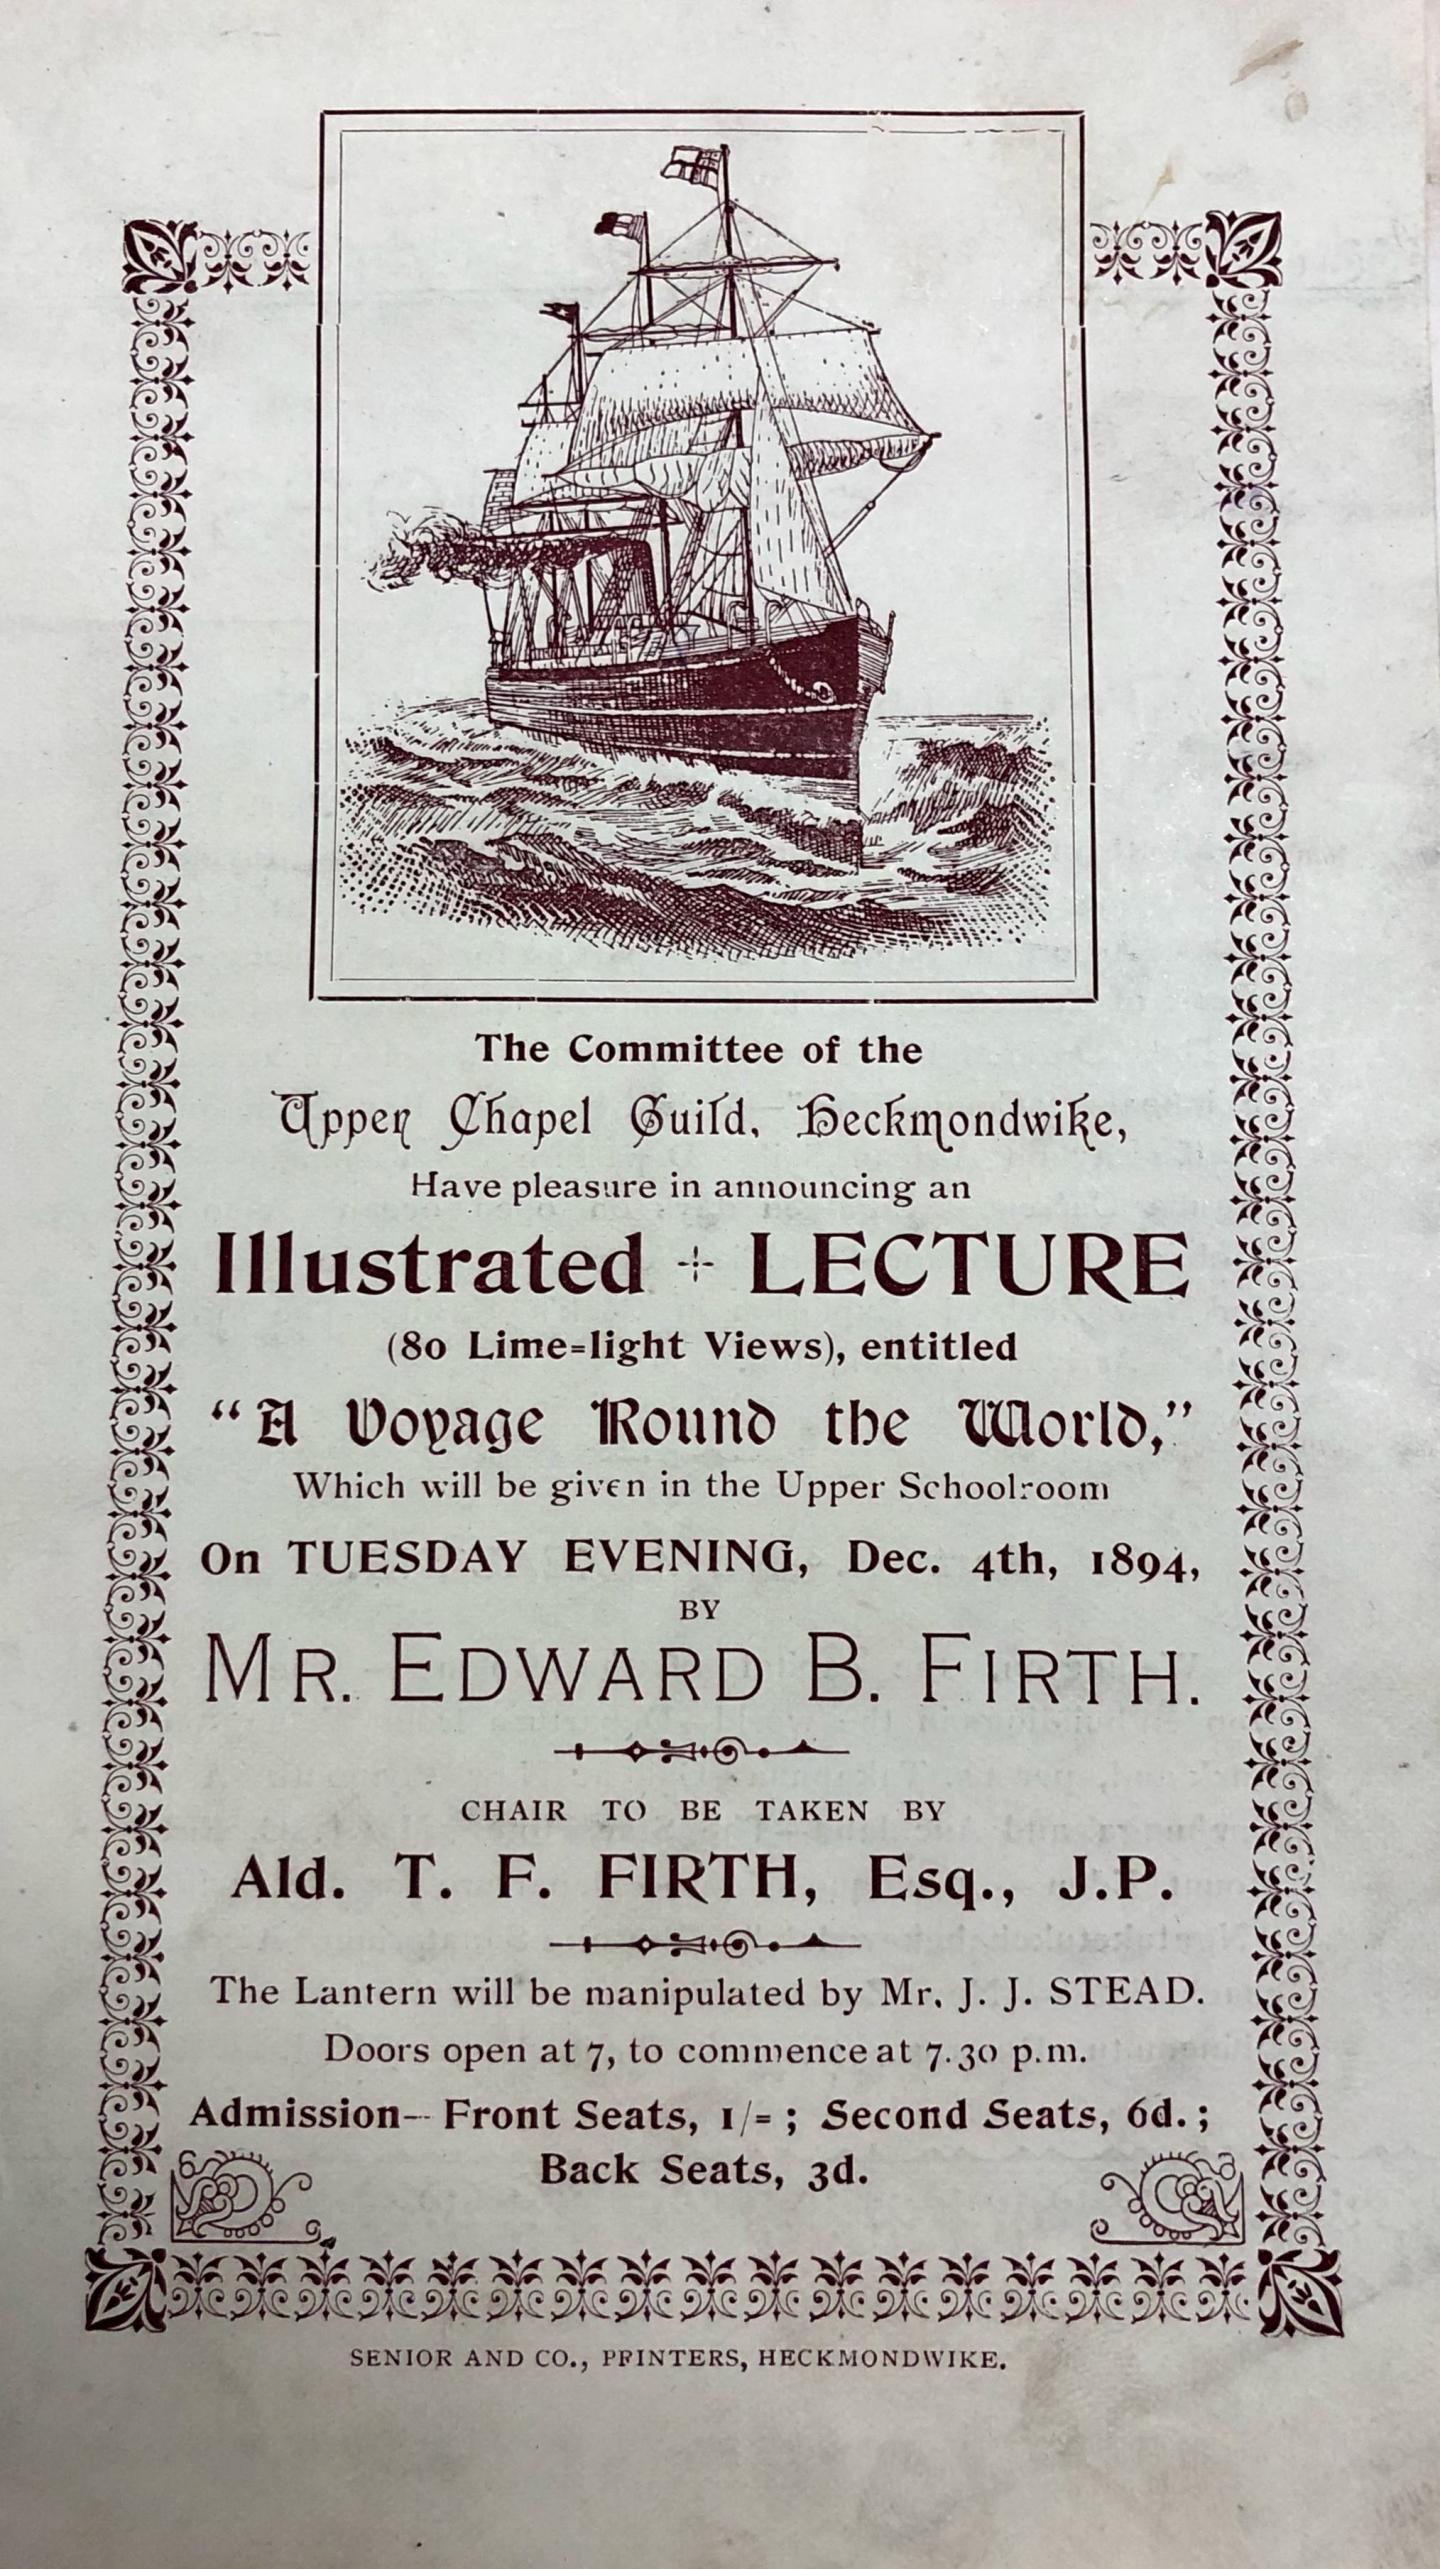 Brochure of Edward B. Firth's illustrate lecture on "A Voyage Round the World", 1894